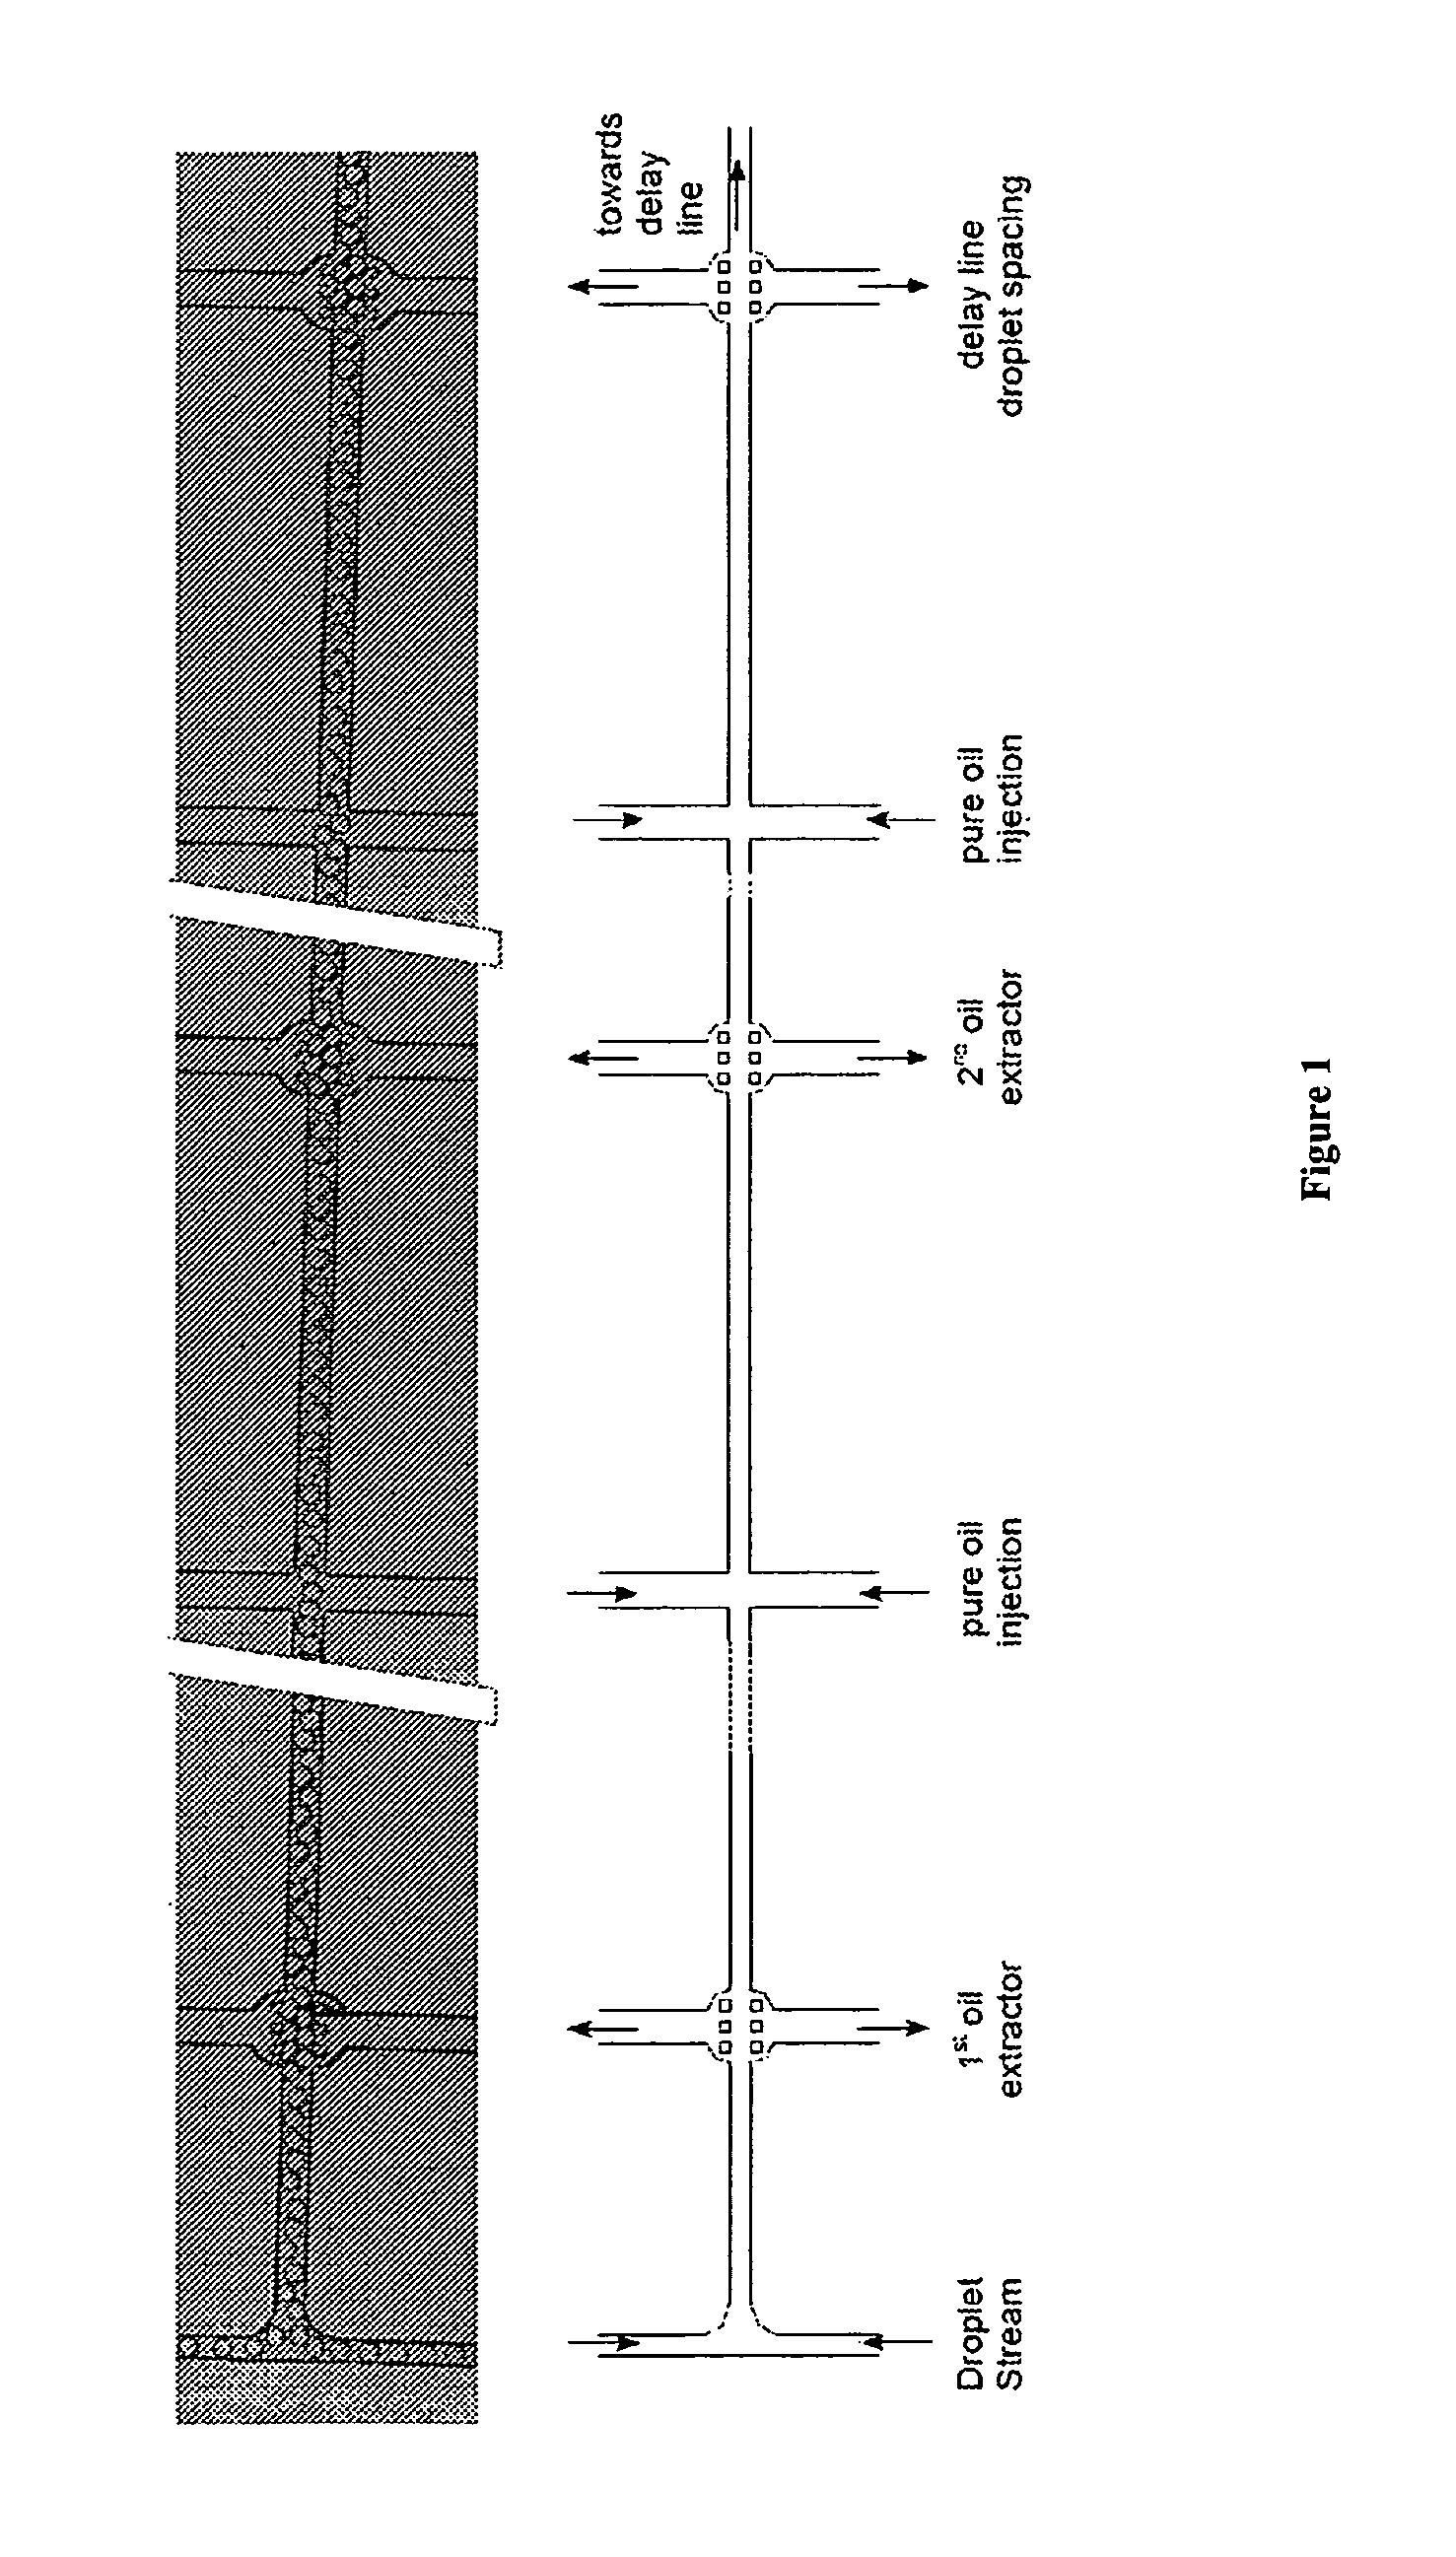 Microfluidic systems and methods for reducing the exchange of molecules between droplets